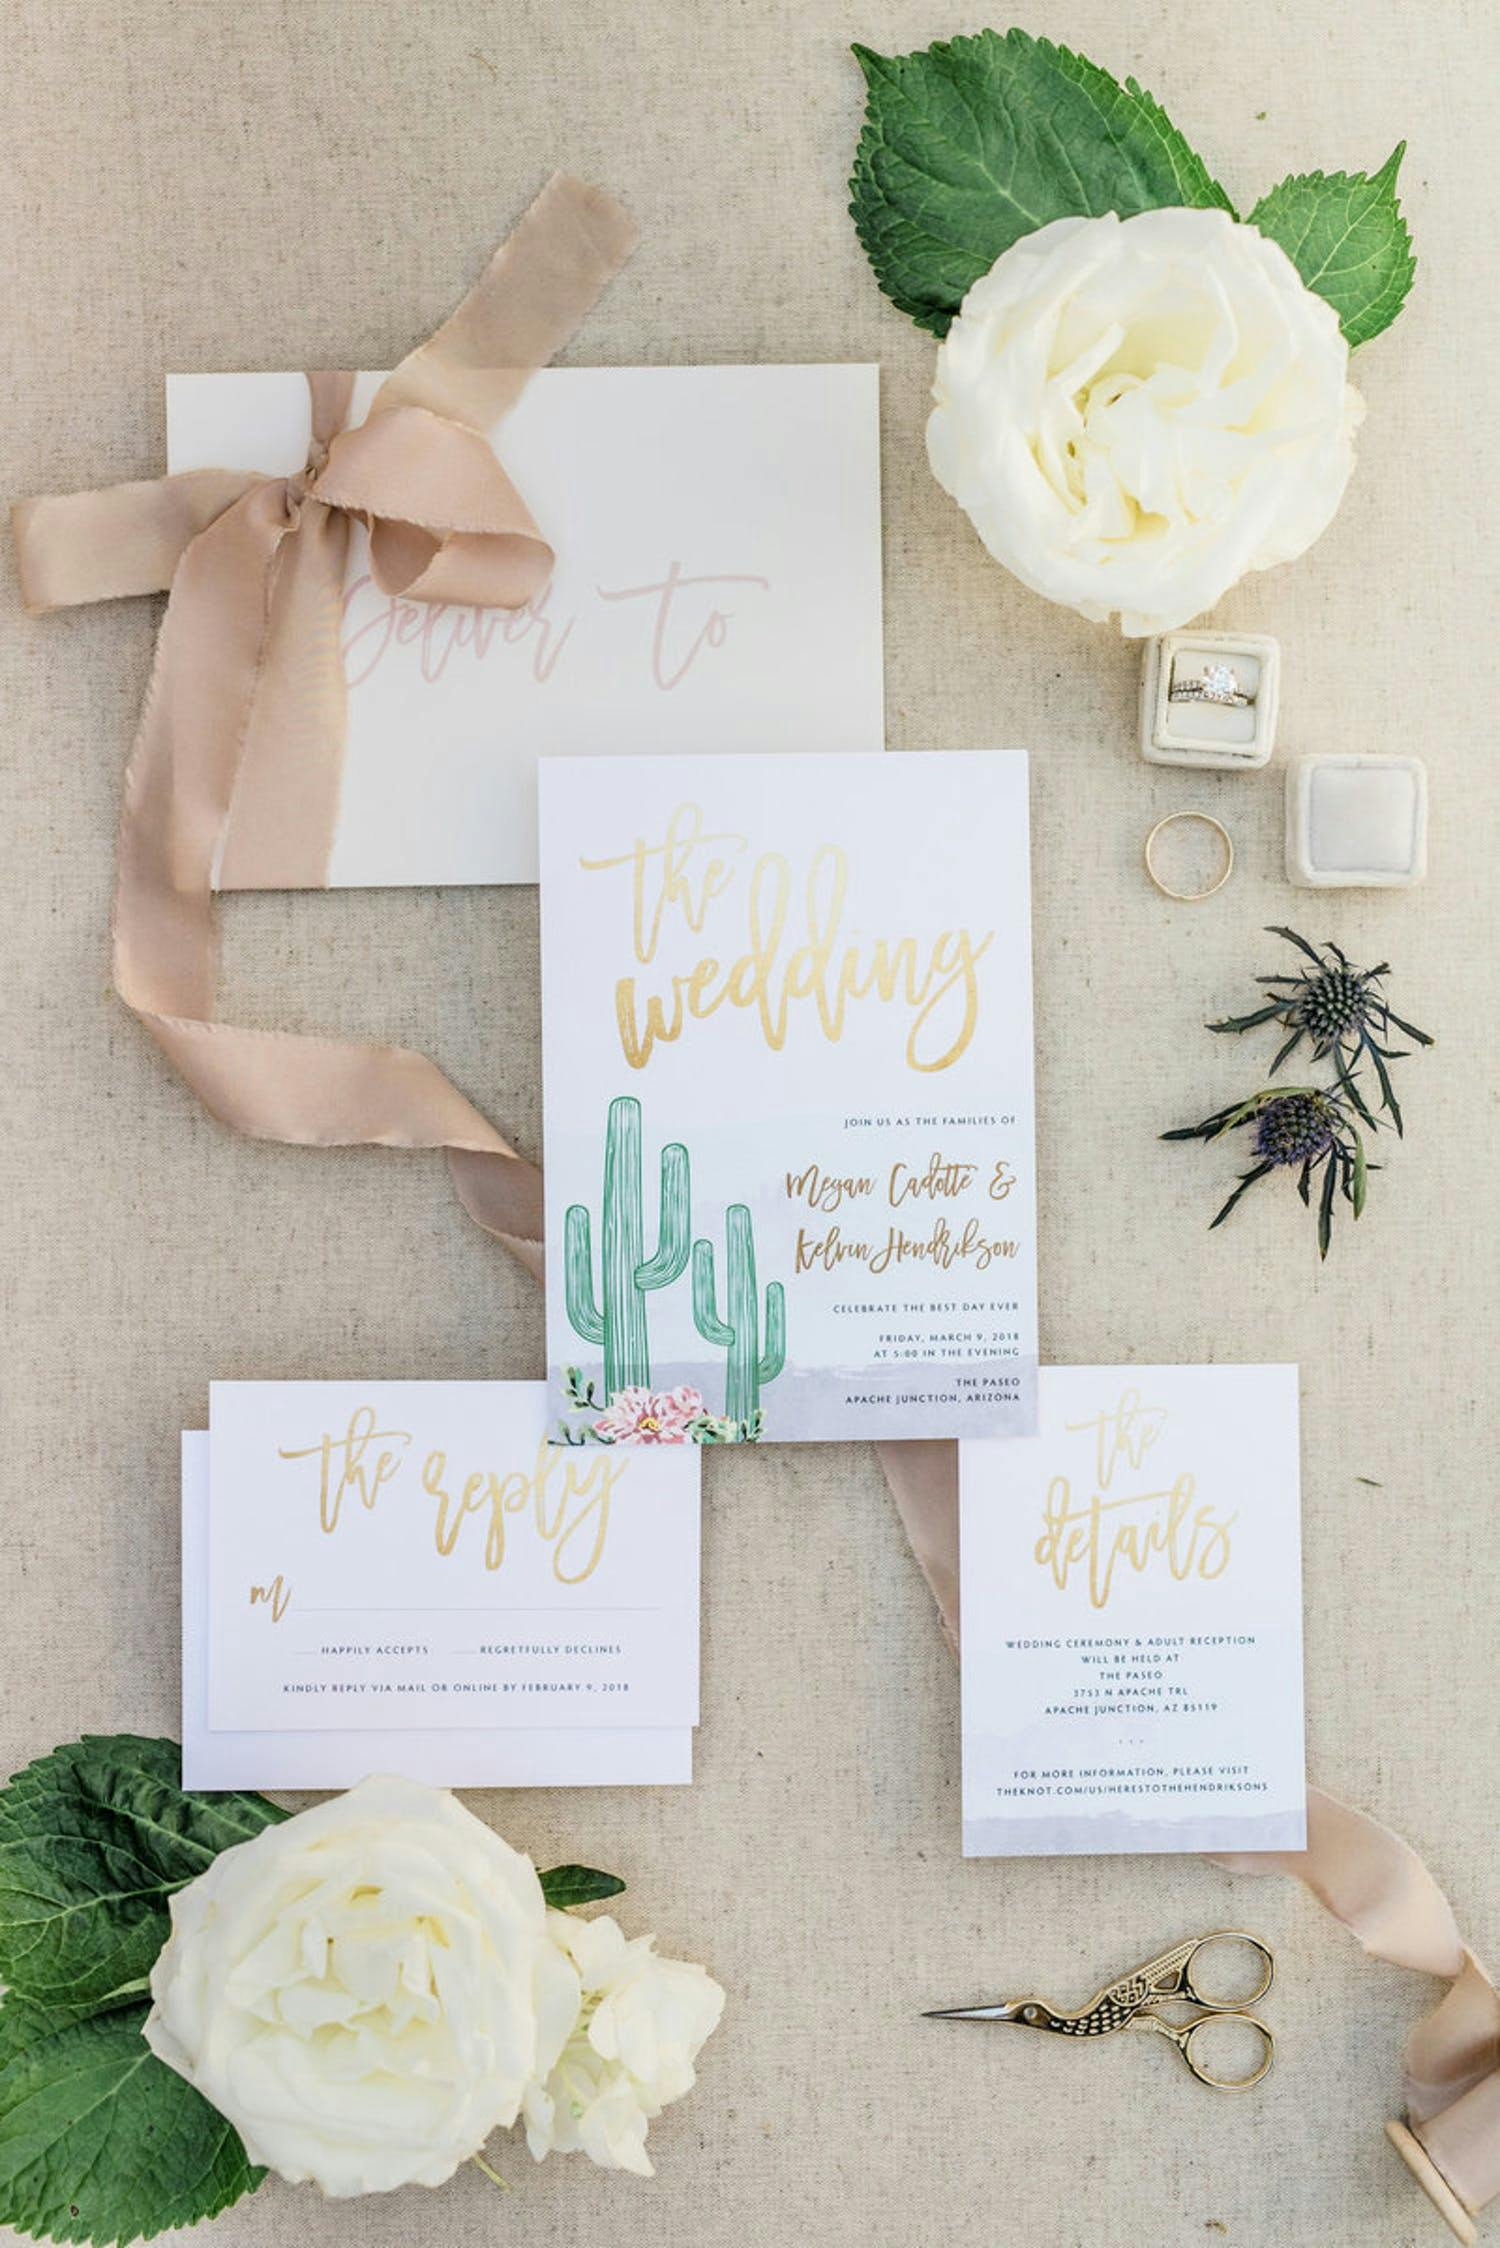 Wedding invitation suite with cacti designs | PartySlate